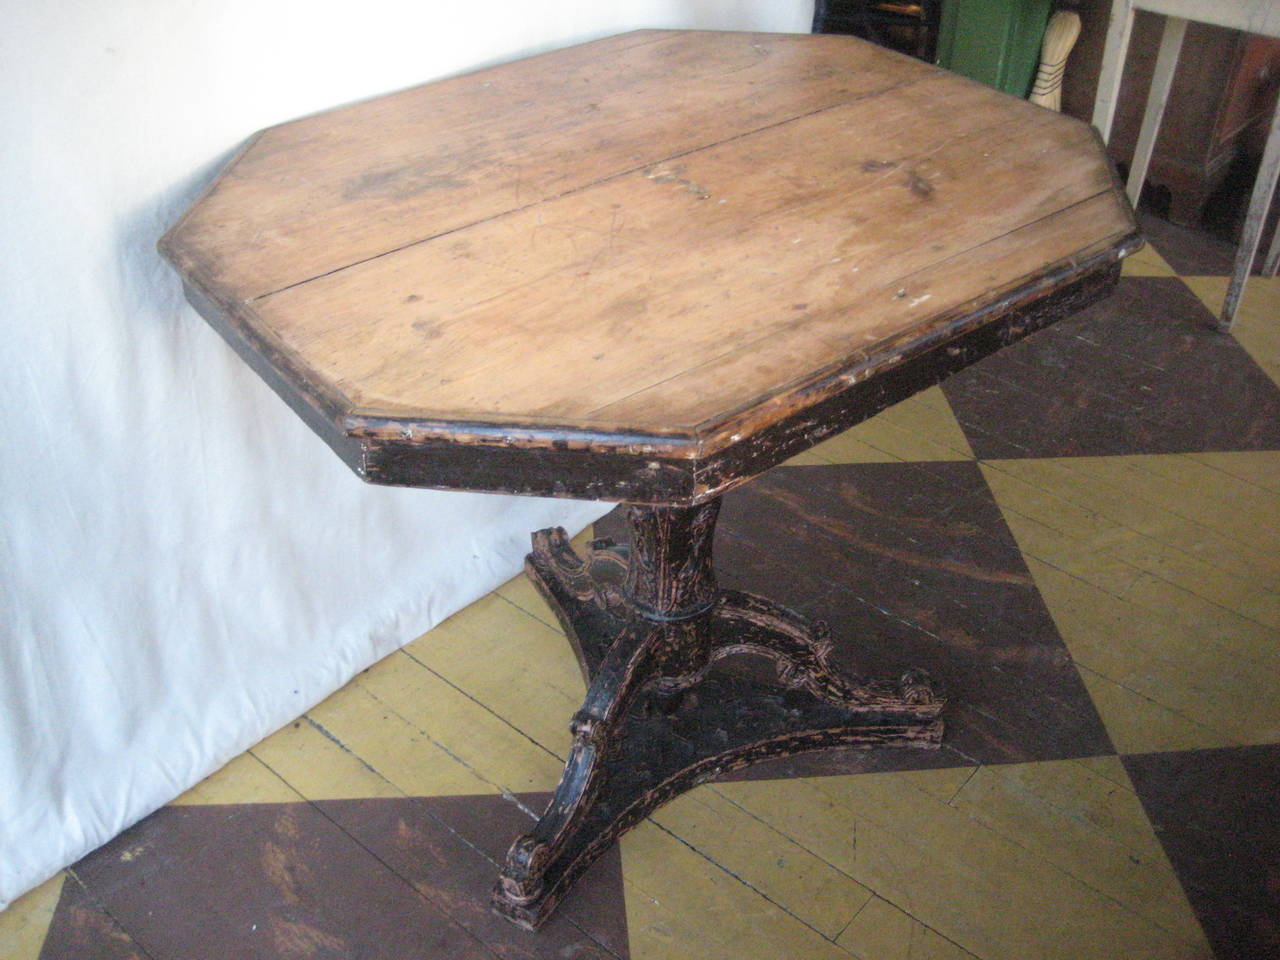 Pine Pedestal based Octagonal table with carved acanthus leaves.